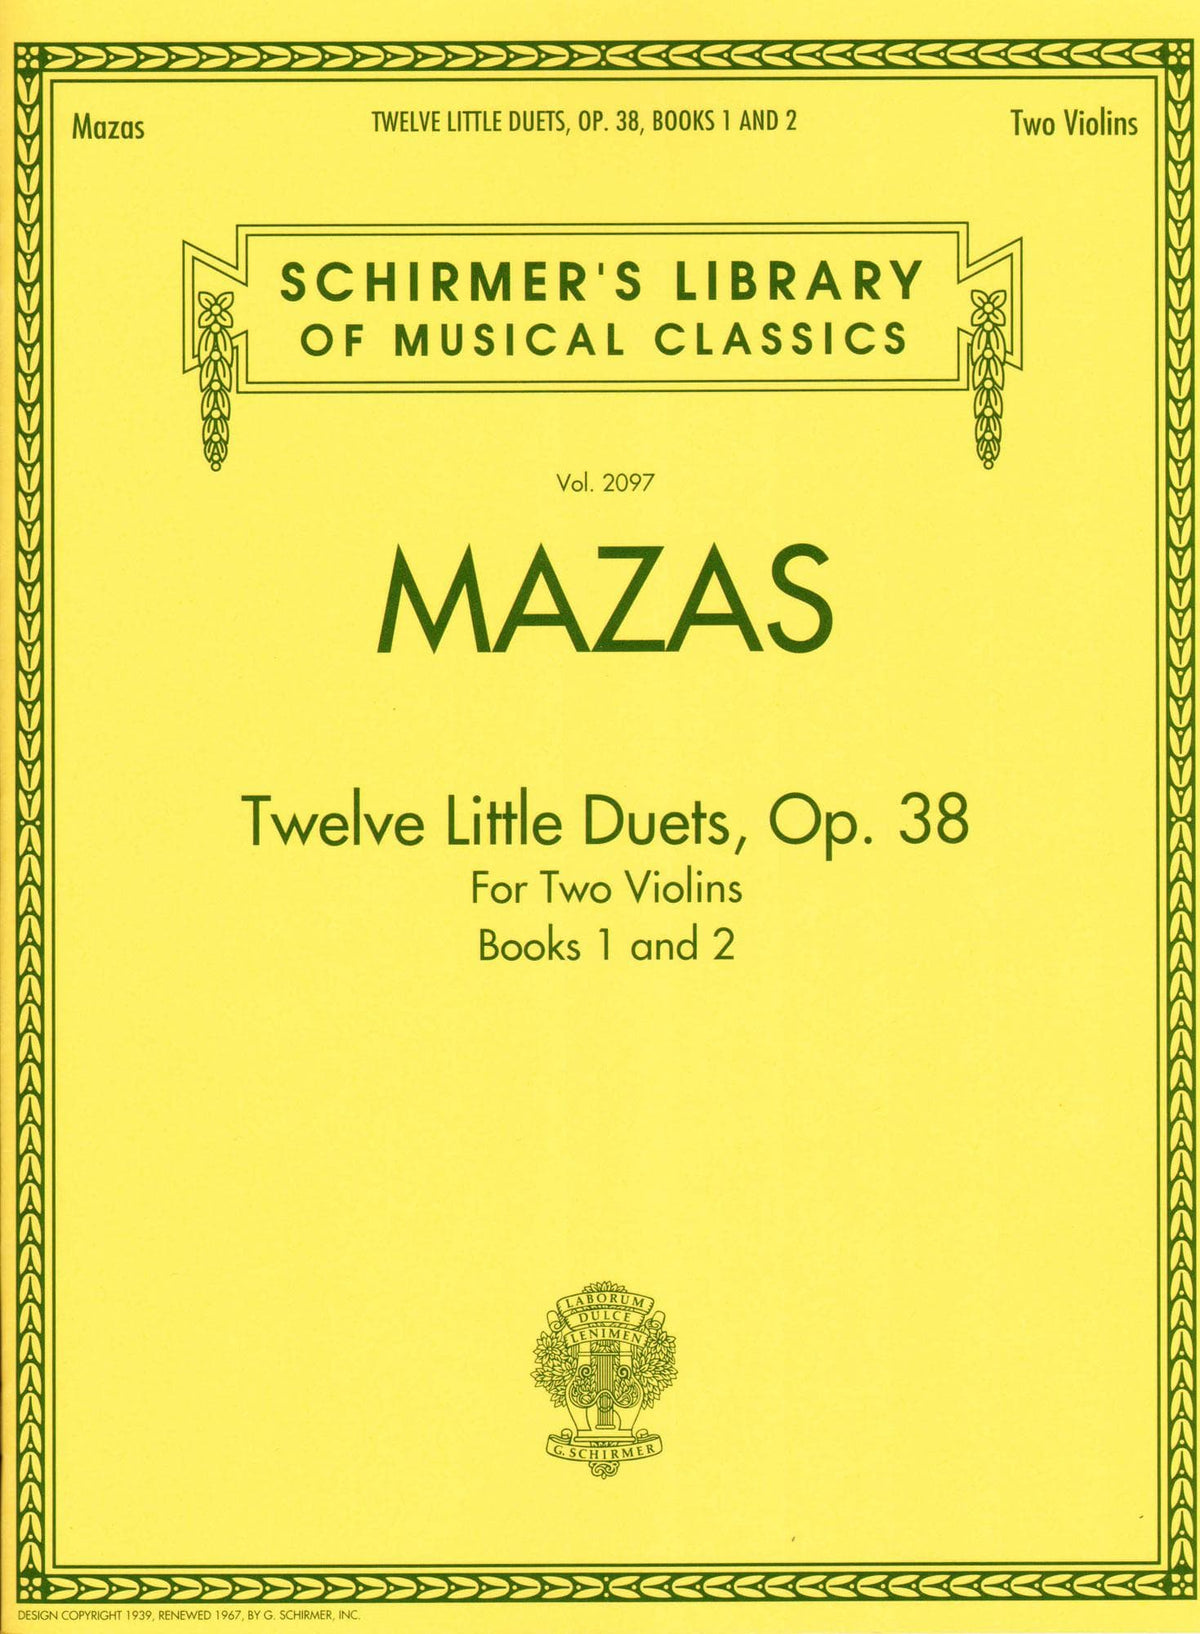 Mazas, Jacques - 12 Little Duets for 2 Violins, Op. 38 - Books 1 and 2 - Schirmer Edition